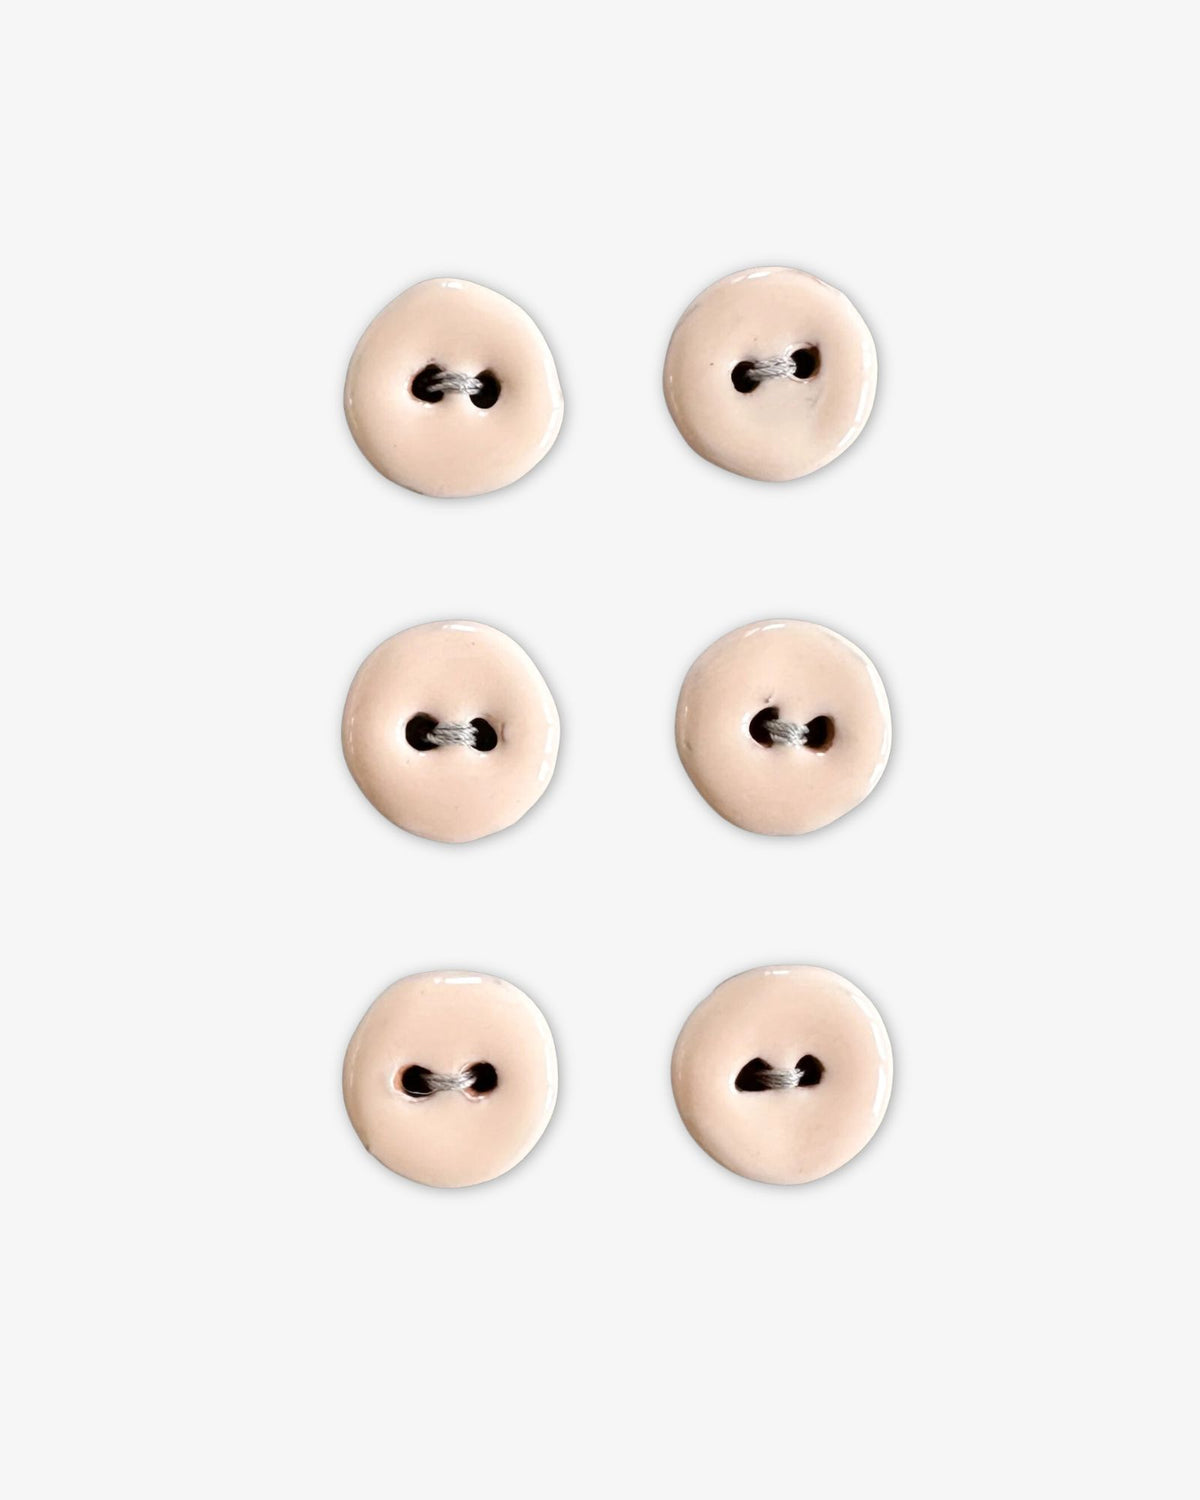 Small Ceramic Buttons by Studio Carta | Tolemaide